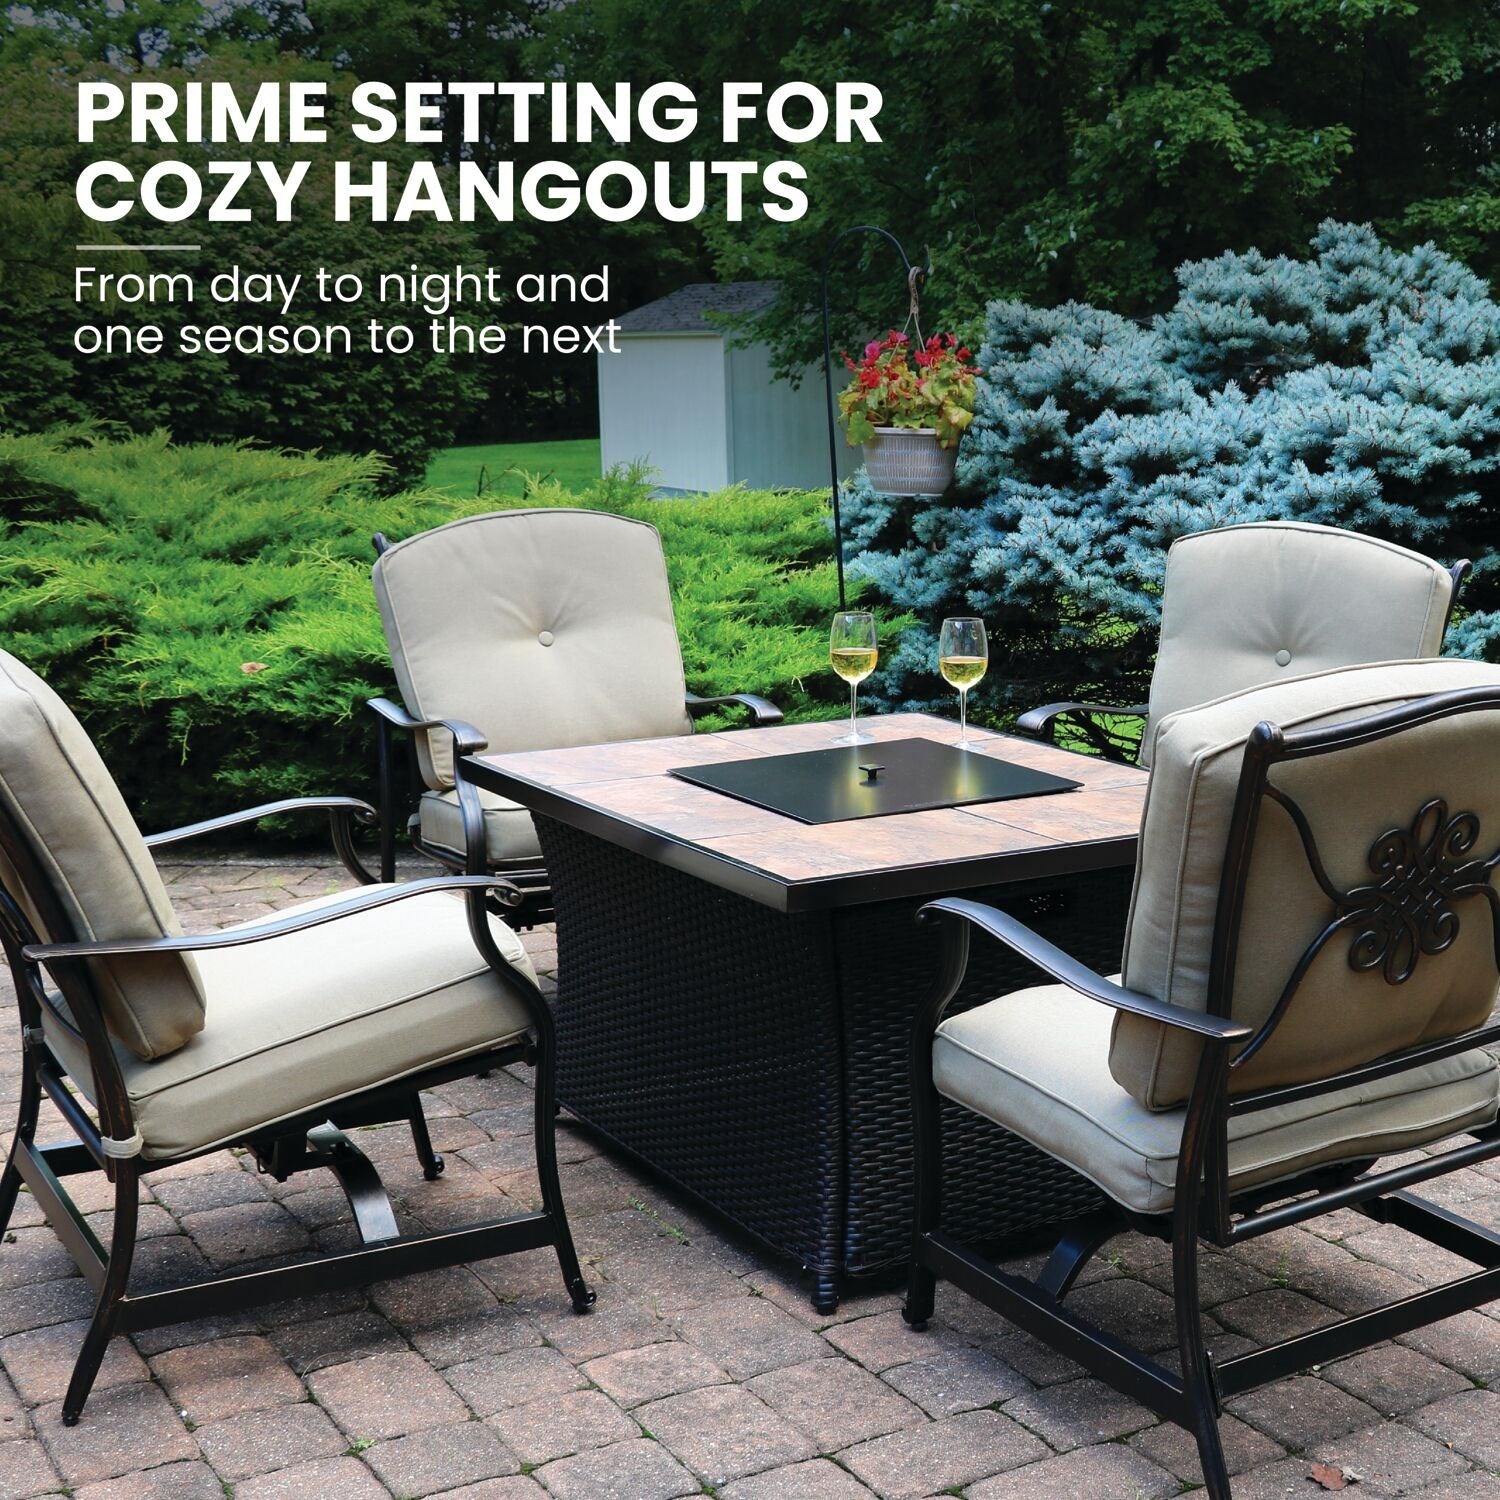 Hanover - Traditions 5 piece: 4 Deep Seating Rockers and Woven Fire Pit with Tile Top - TRAD5PCWVFP-TL